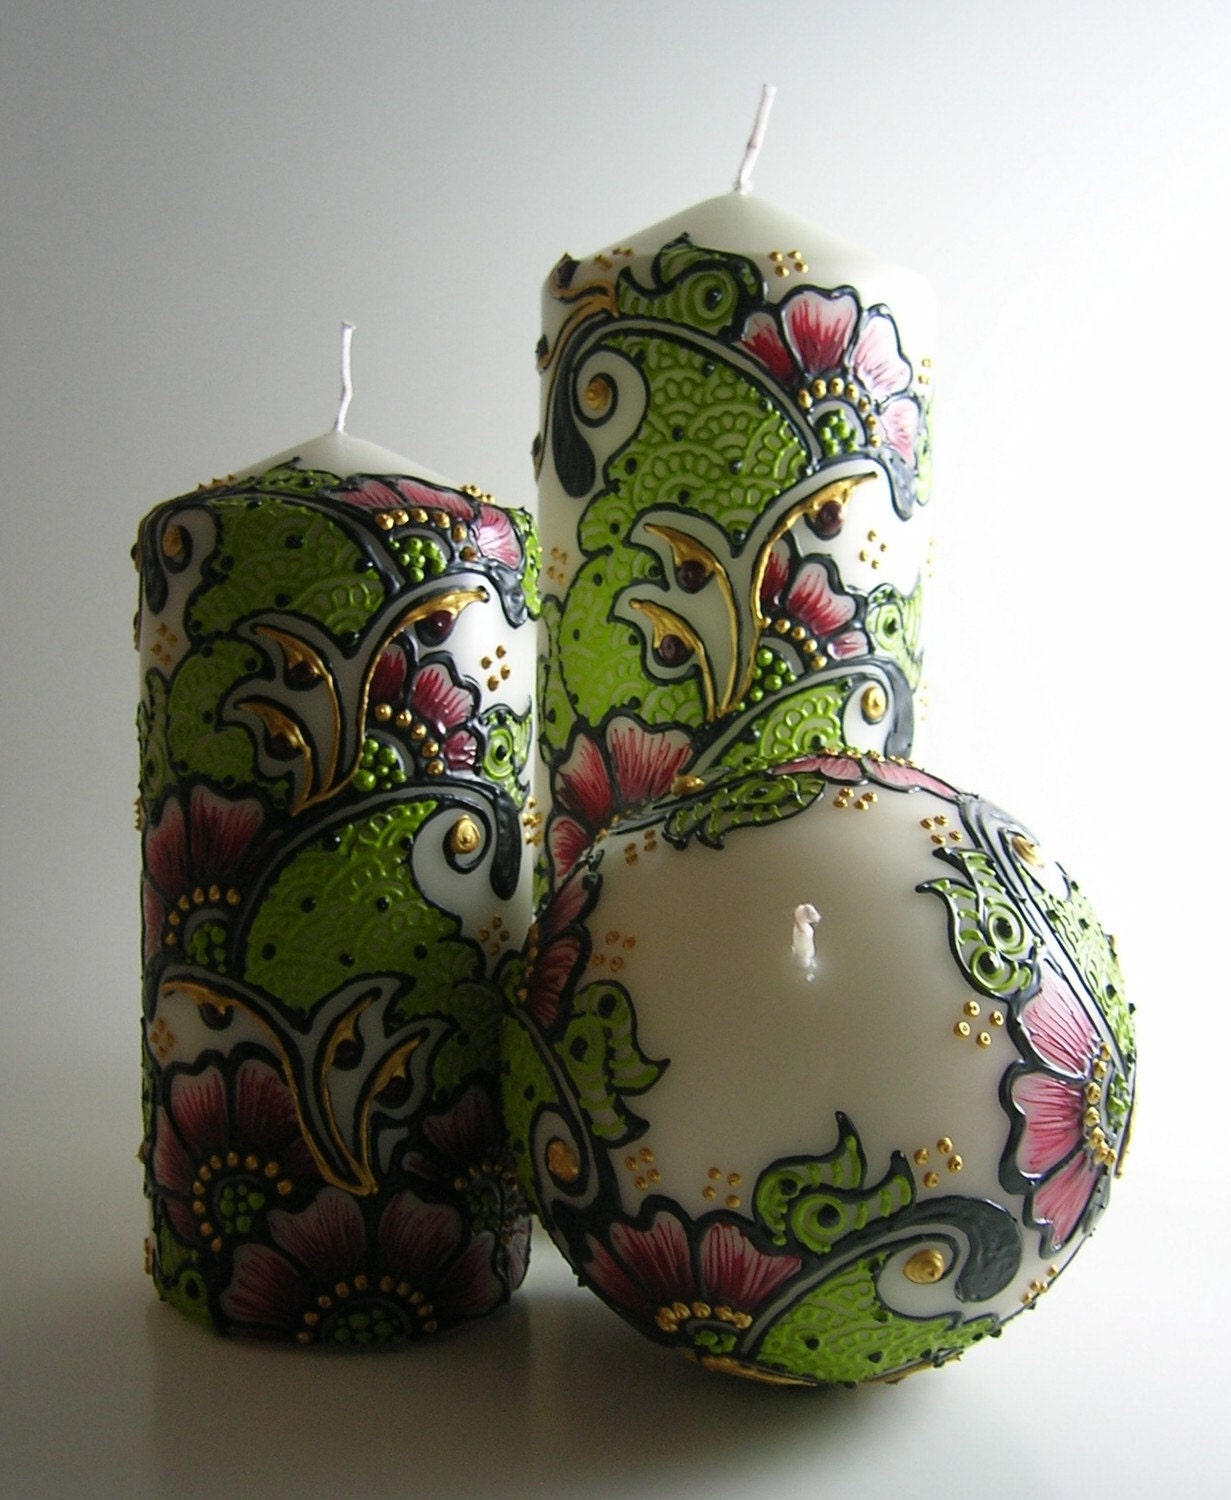 set of 3 henna inspired candles in cranberry red, pea green and buttery gold